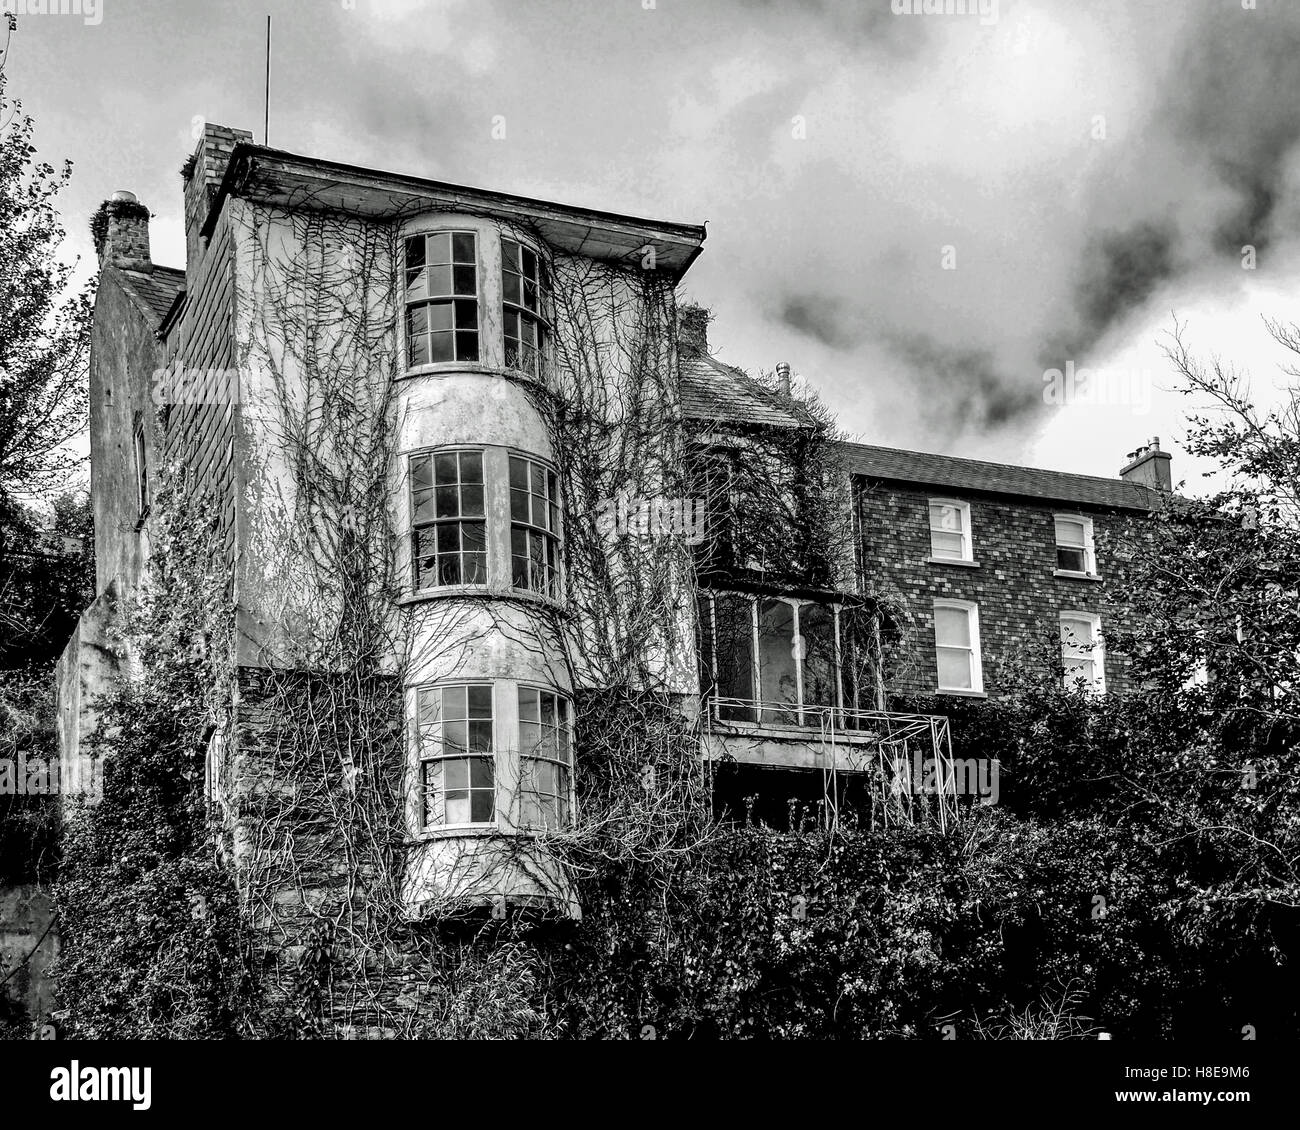 Spooky/scary looking house in Kinsale, County Cork, Ireland under a dramatic sky. Stock Photo